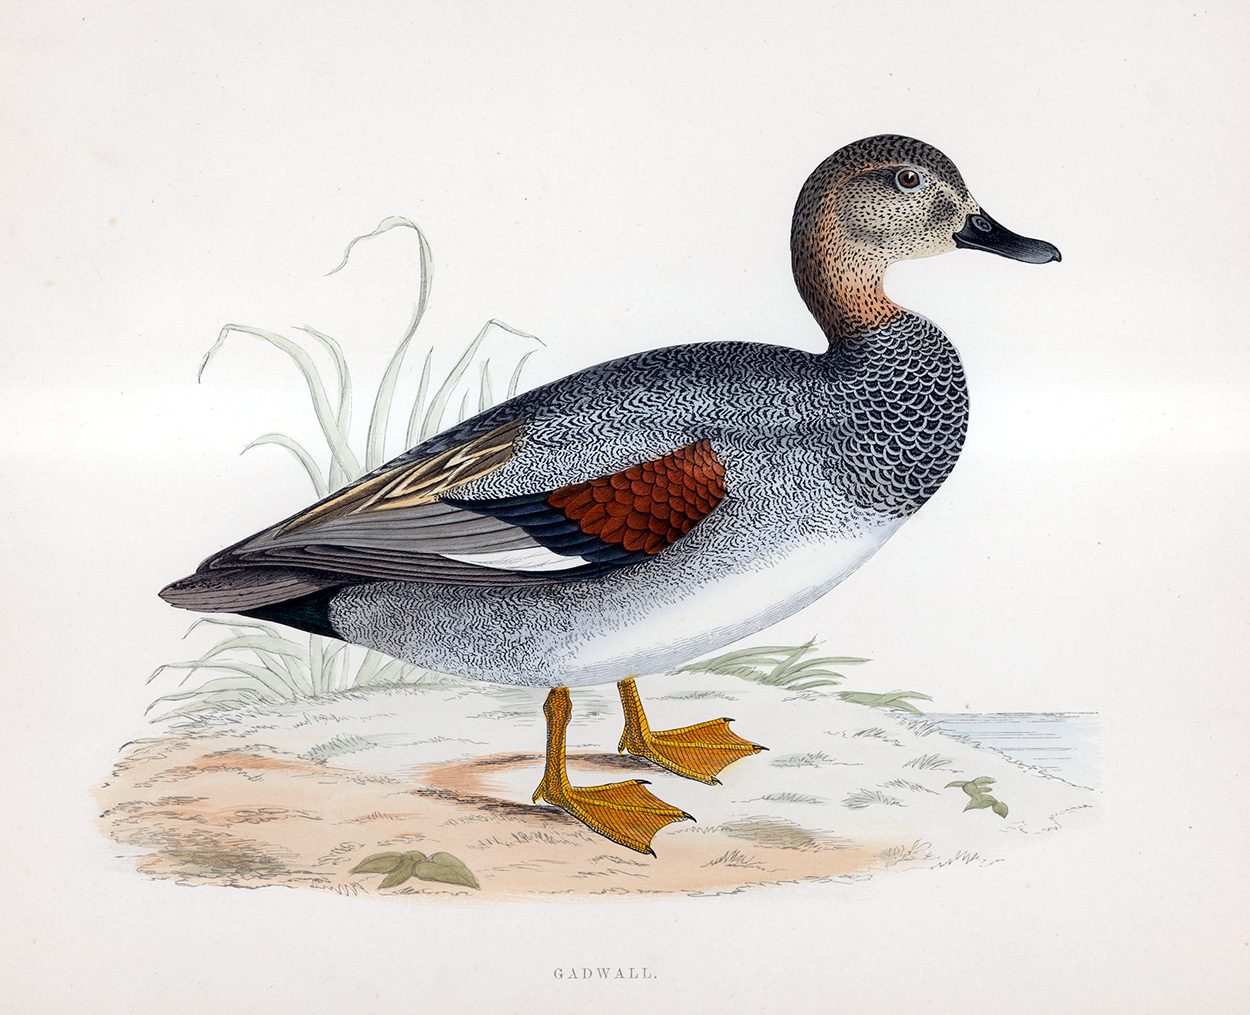 Gadwall - hand coloured lithograph 1891 (Print) art by Beverley R Morris Art at The Illustration Art Gallery